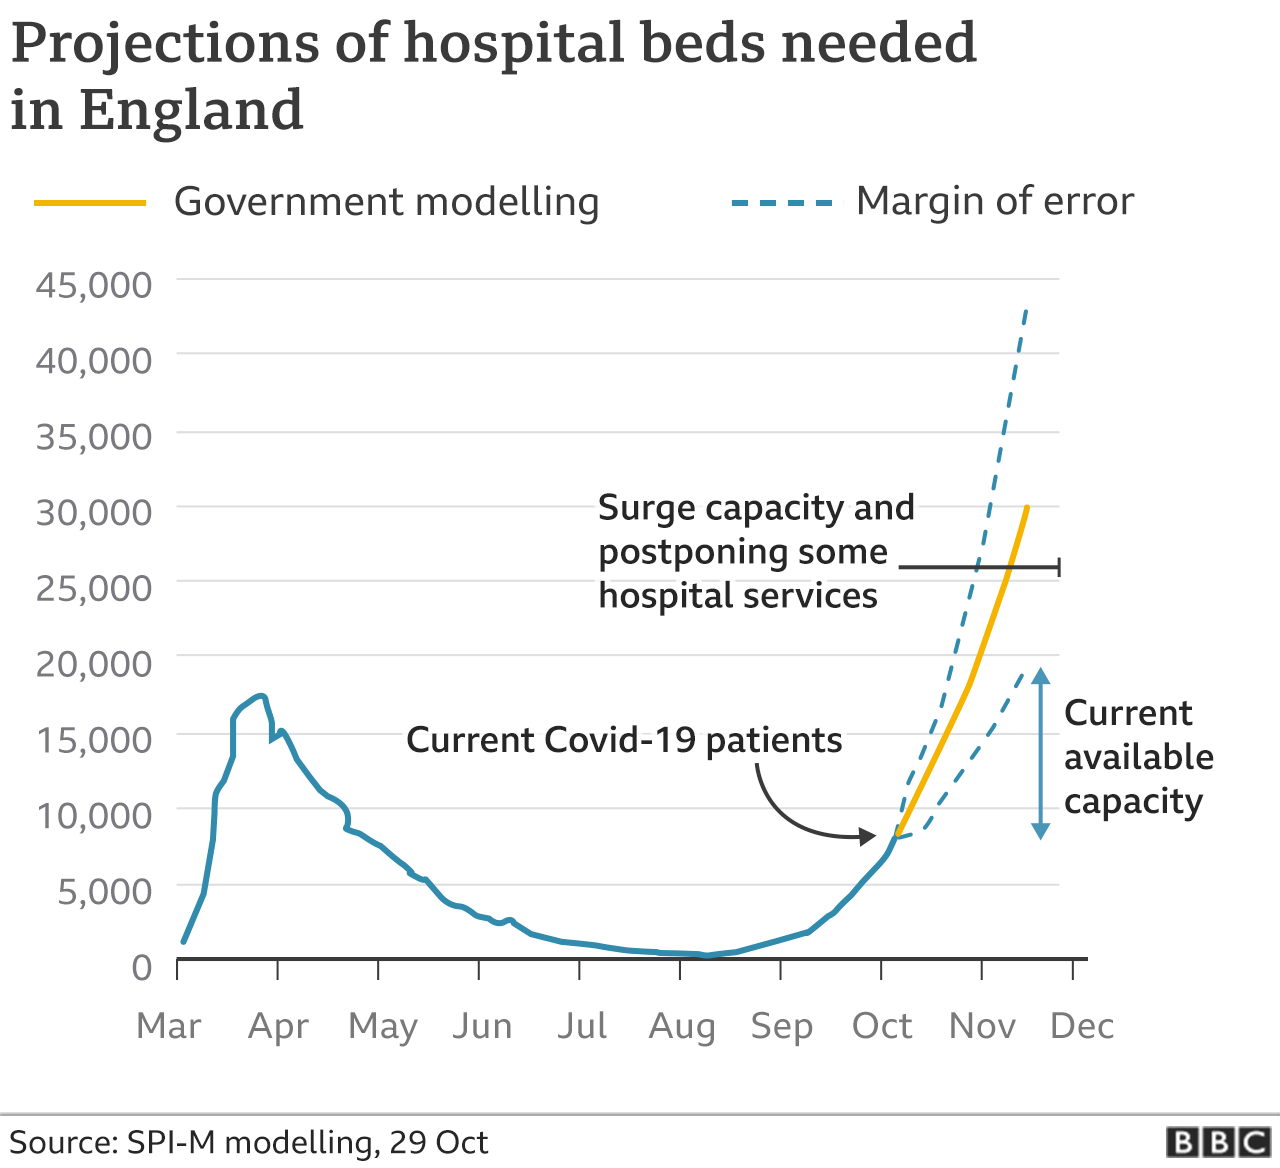 Chart showing NHS projections